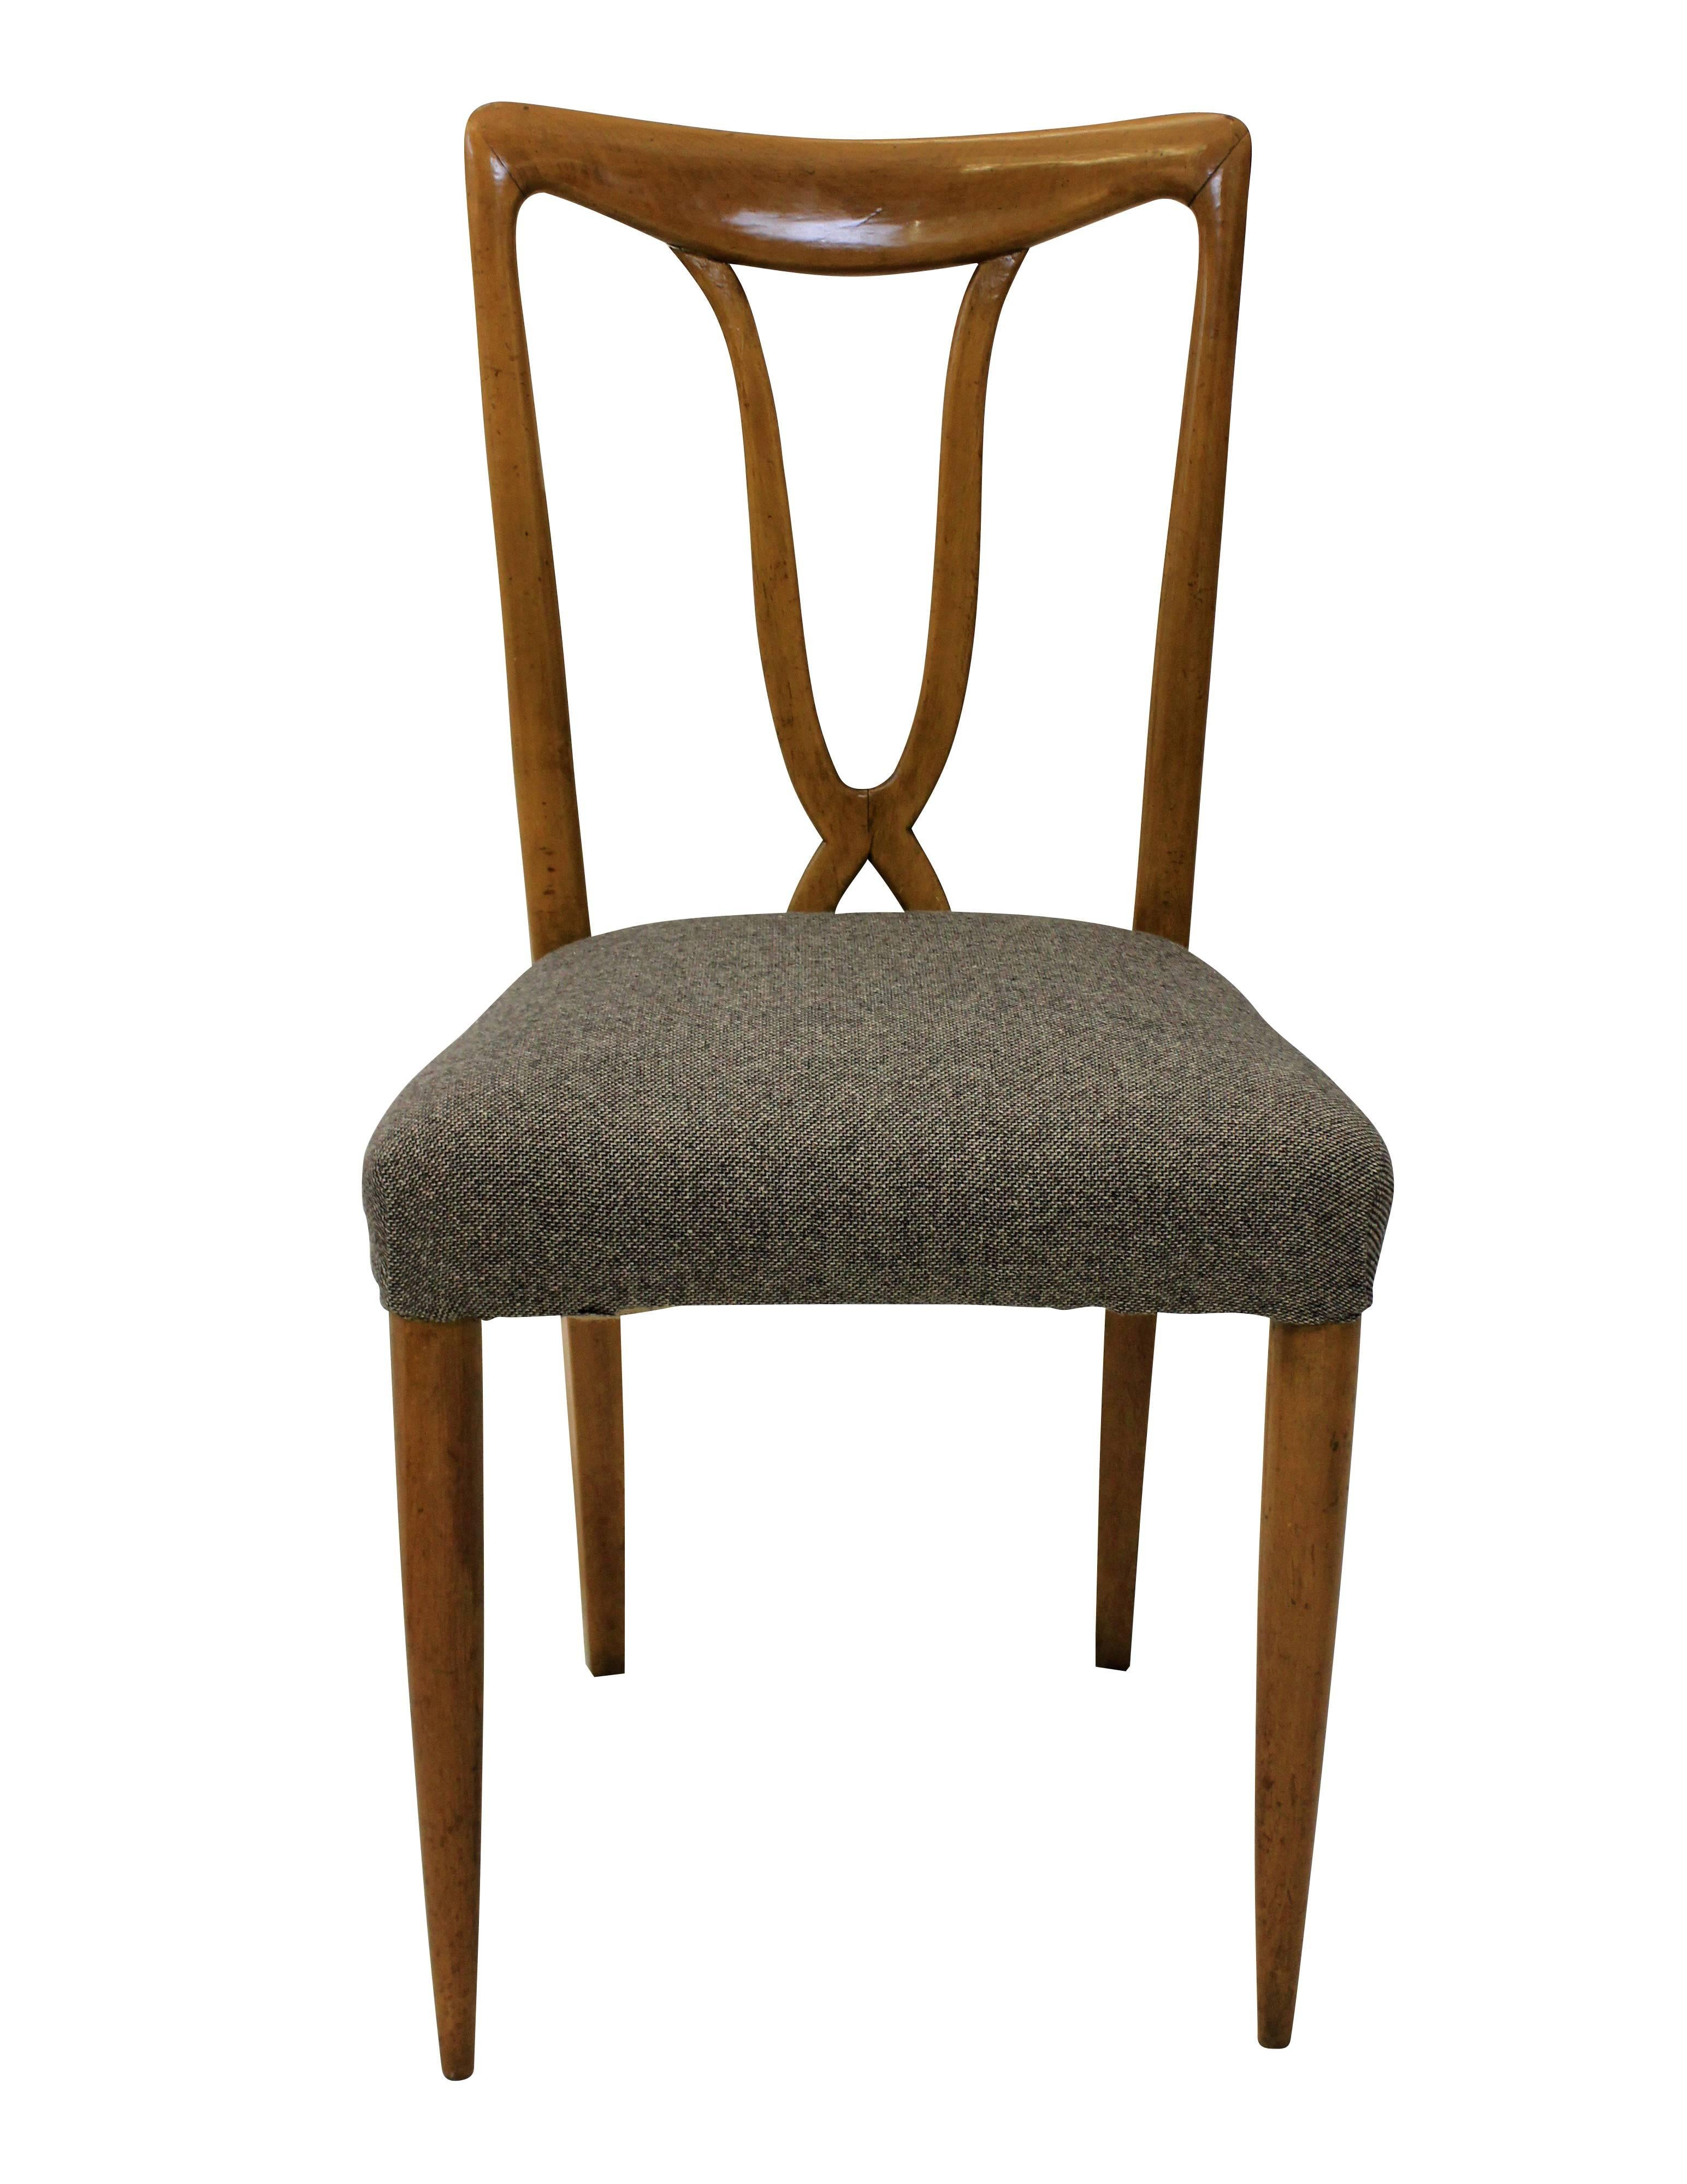 A set of six Italian dining chairs of stylish design in cherrywood. With sculptural backs and newly upholstered in wool.